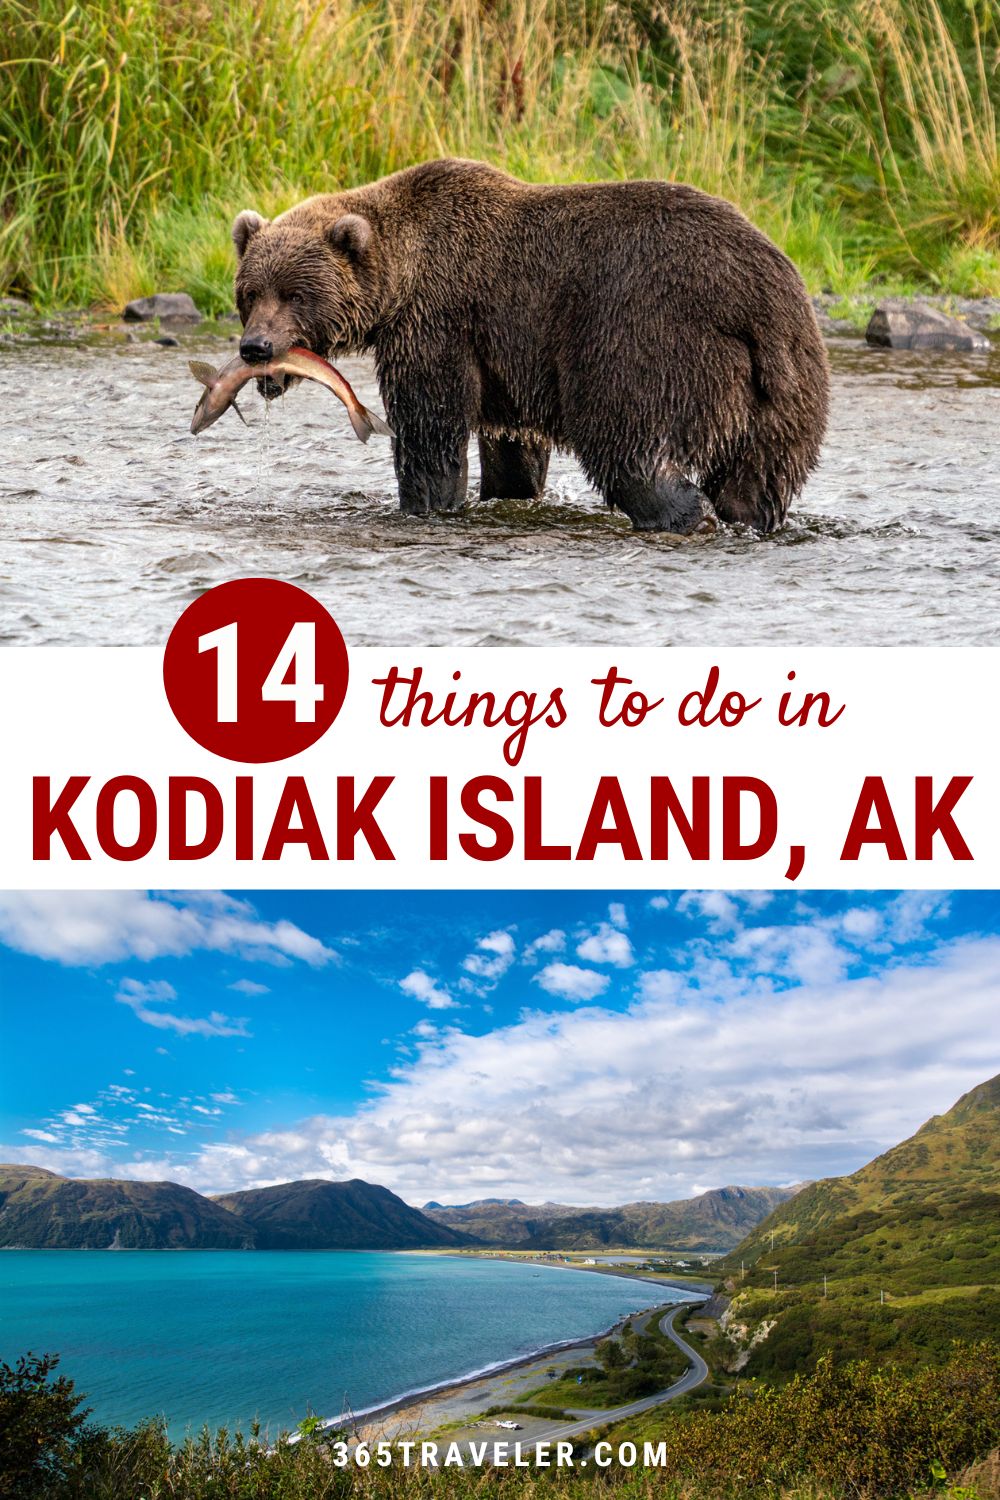 14 BEST THINGS TO DO IN KODIAK ISLAND AK AND THE SURROUNDING AREA